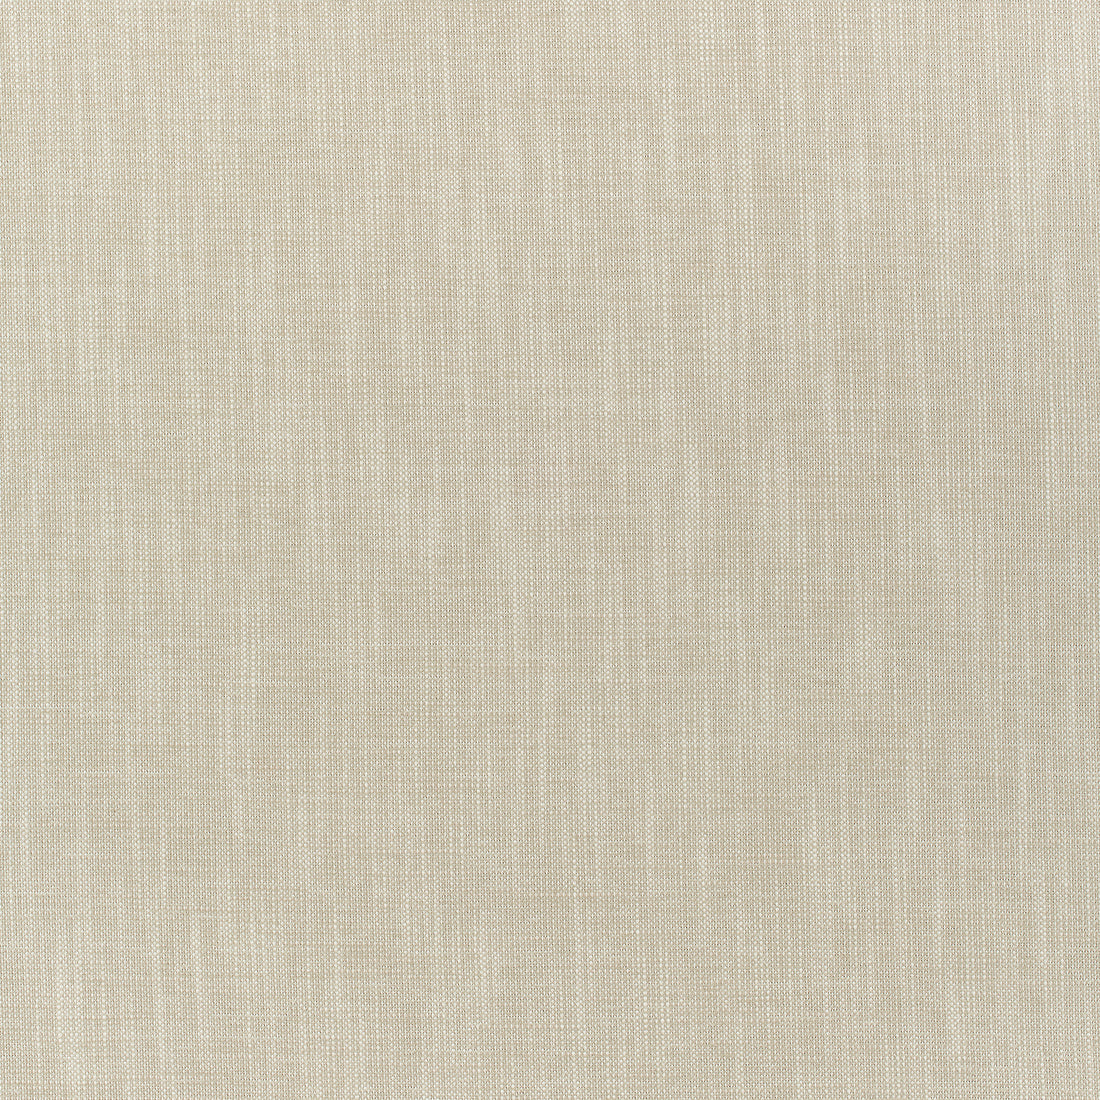 Bailey fabric in dove color - pattern number W80504 - by Thibaut in the Mosaic collection